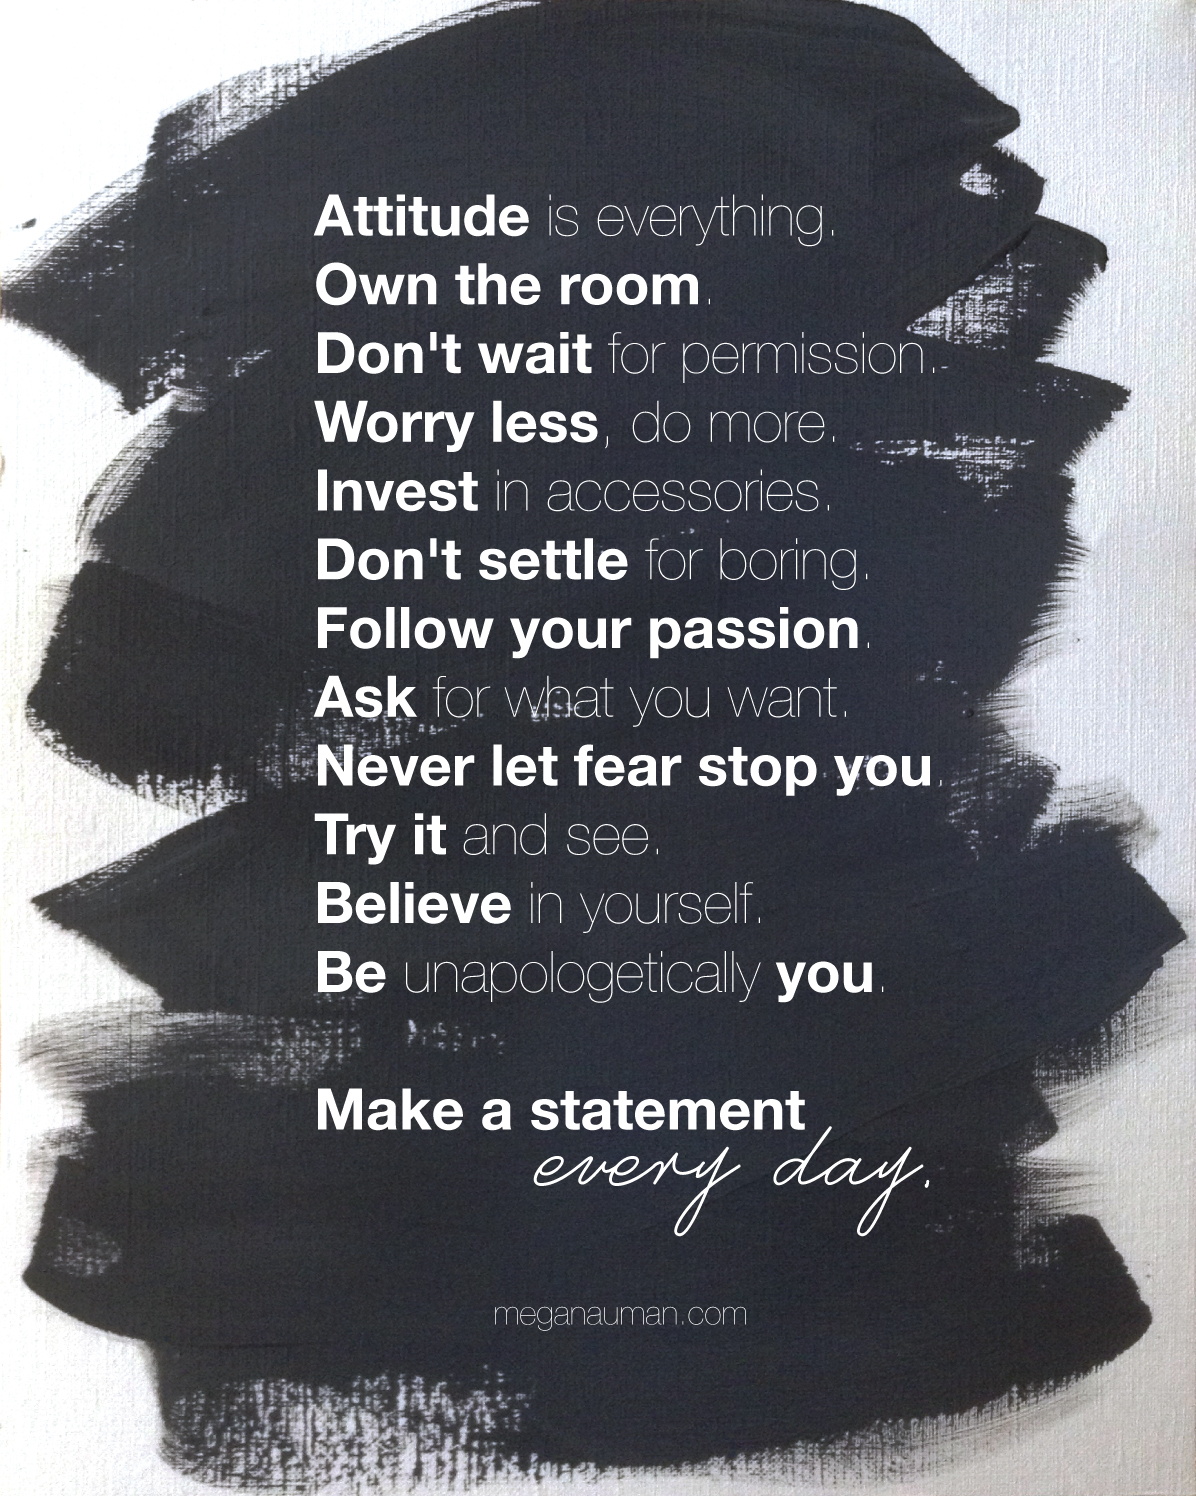 Make a Statement Every Day - click through to get a free, printable version of the manifesto!